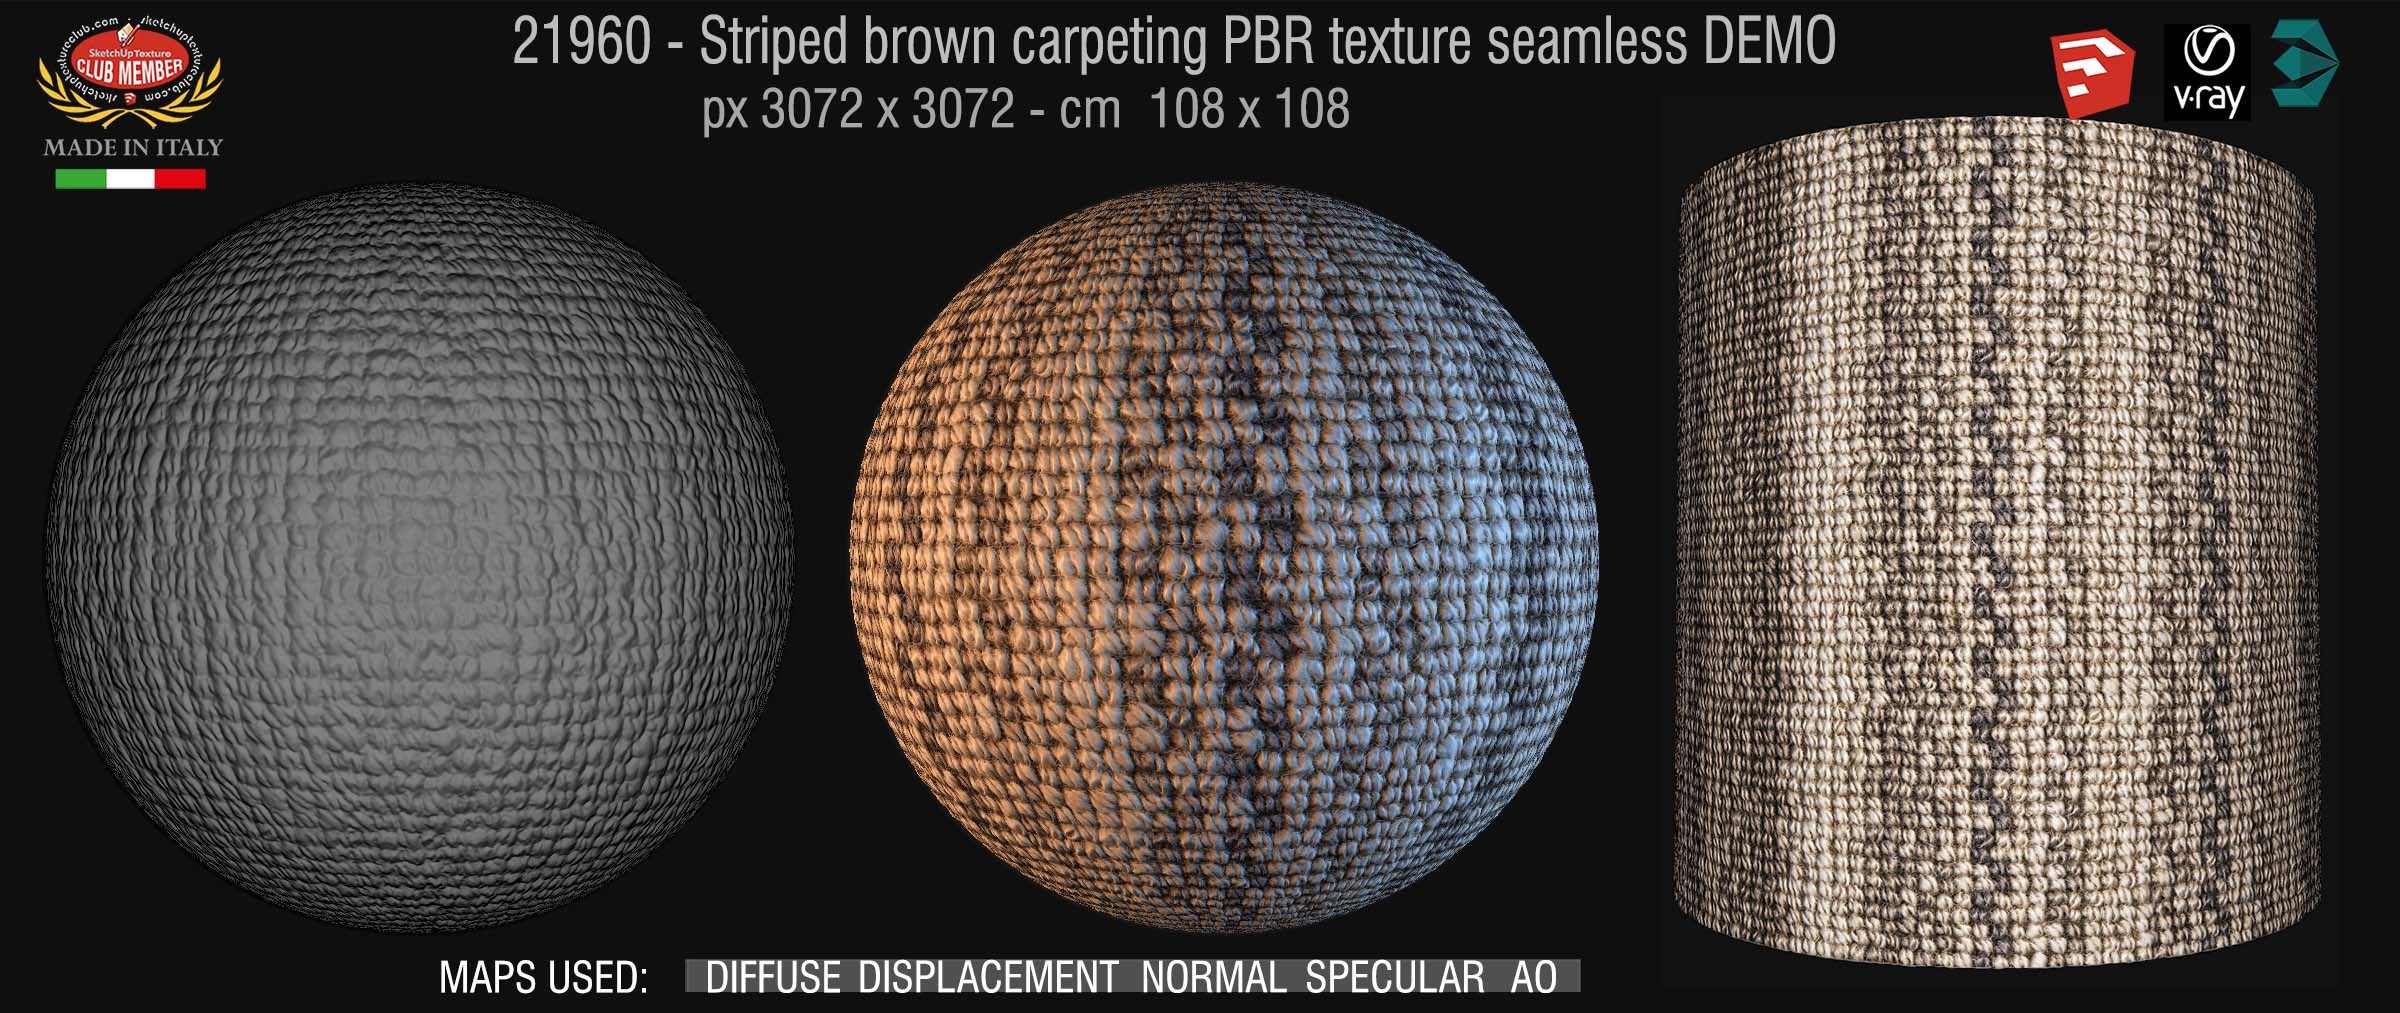 21960 Striped brown carpeting PBR texture seamless DEMO